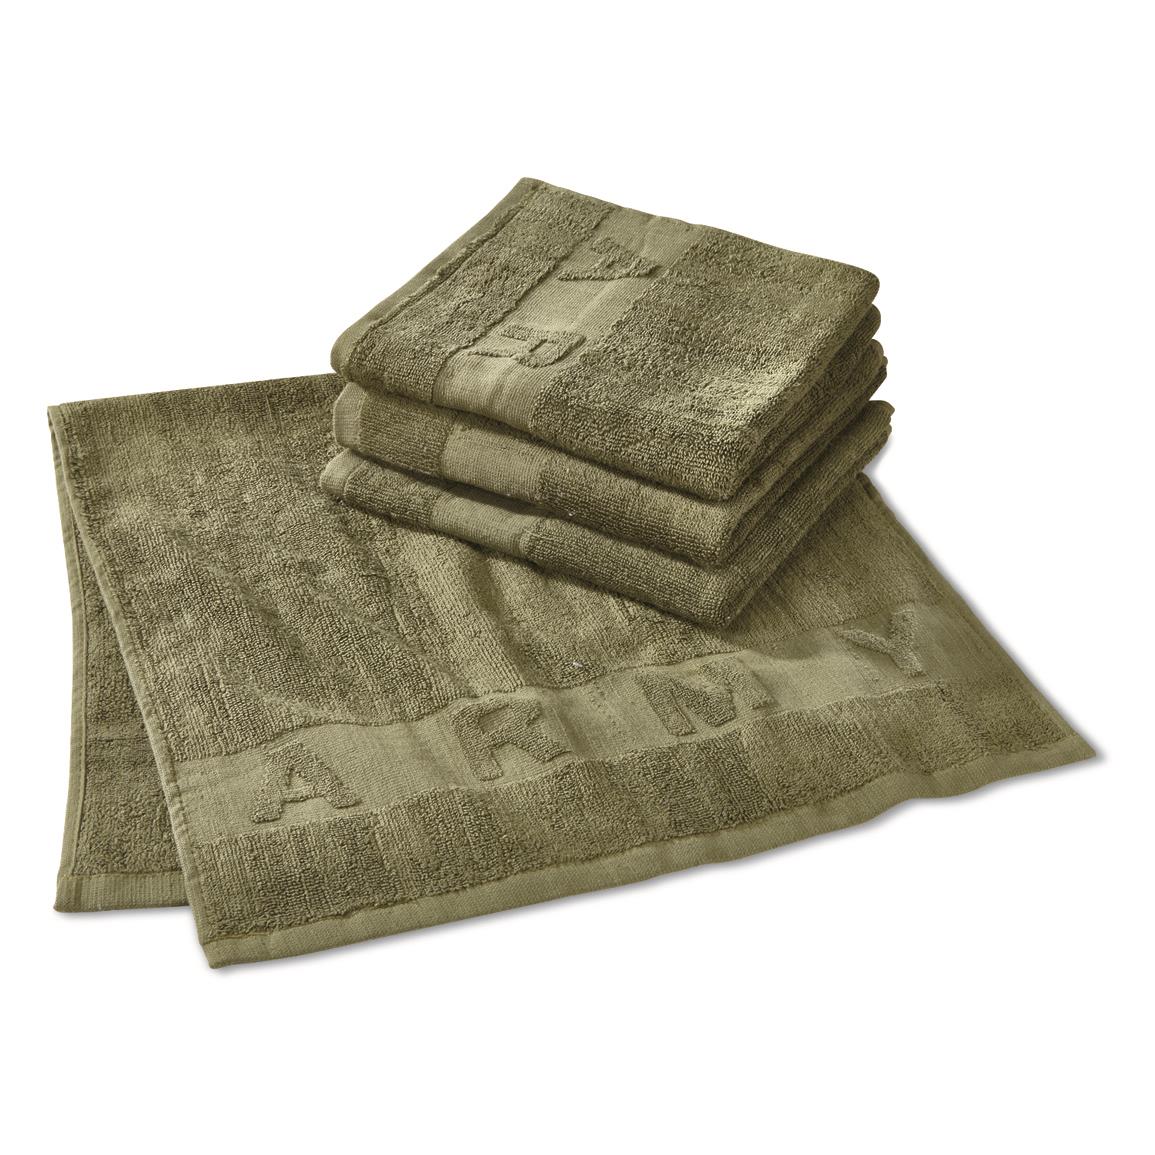 NEW 6 PACK MILITARY ISSUE POLYESTER MICROFIBER WASHCLOTH COYOTE BROWN 